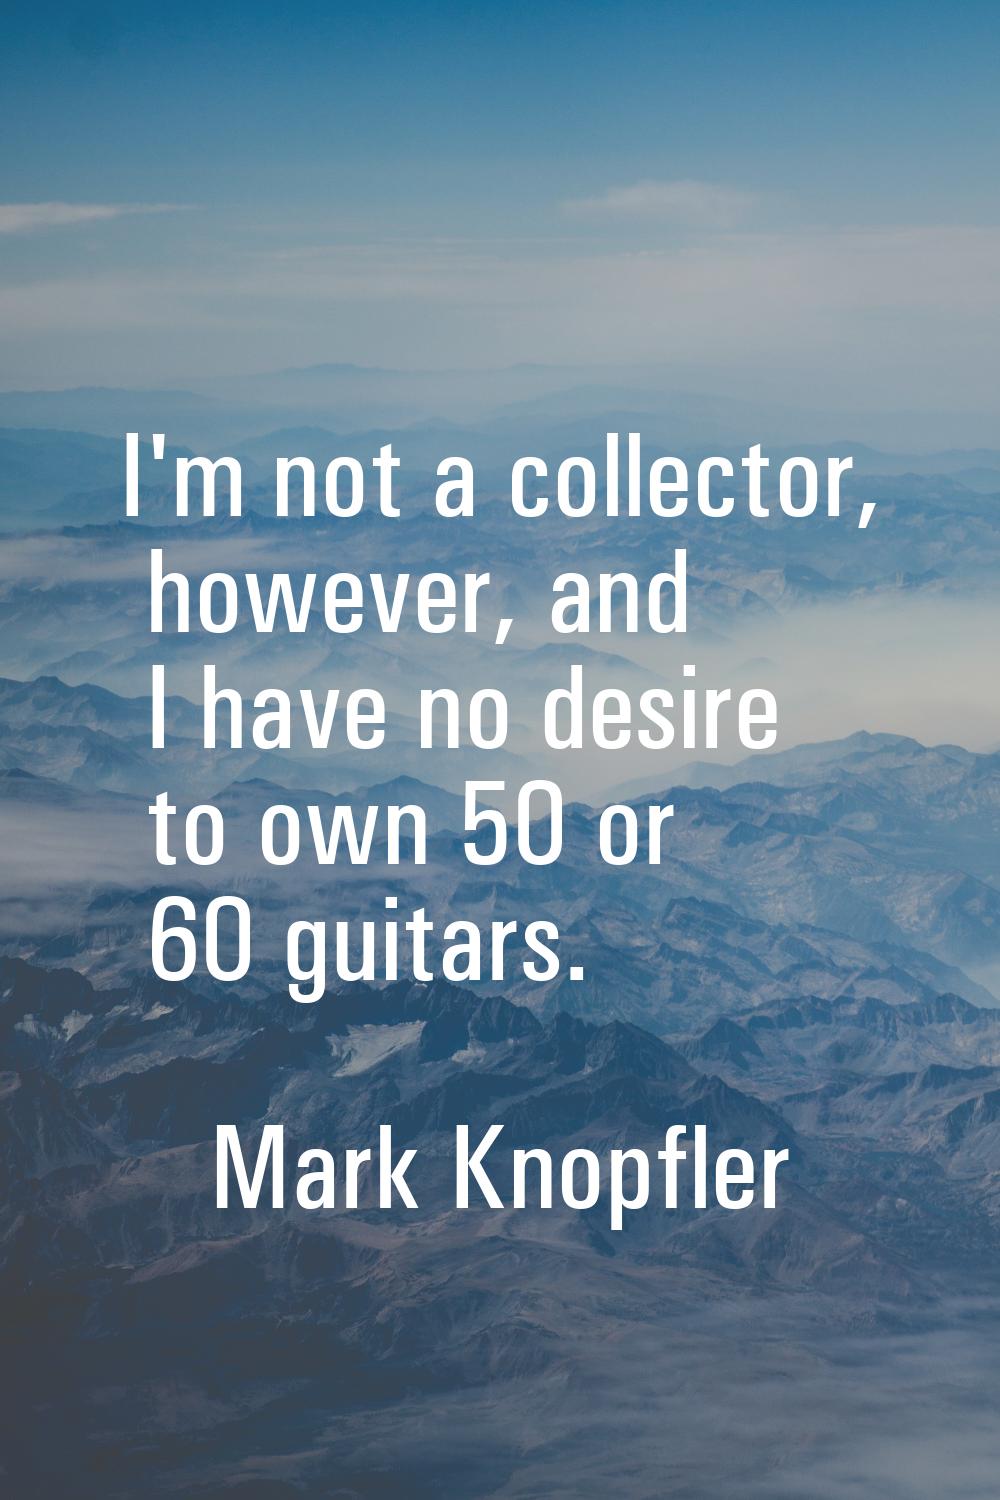 I'm not a collector, however, and I have no desire to own 50 or 60 guitars.